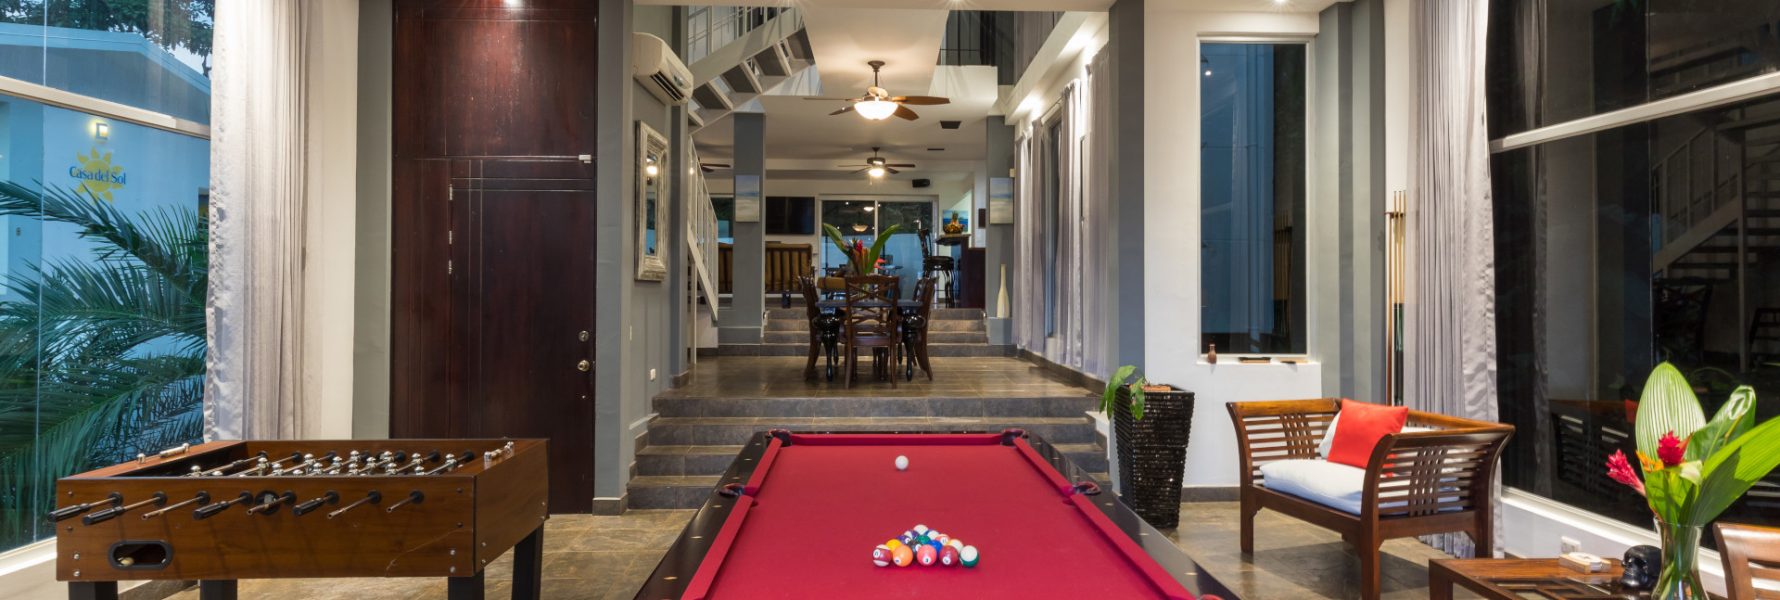 The games room features comfy seating, a pool table, foosball table, and stunning views.